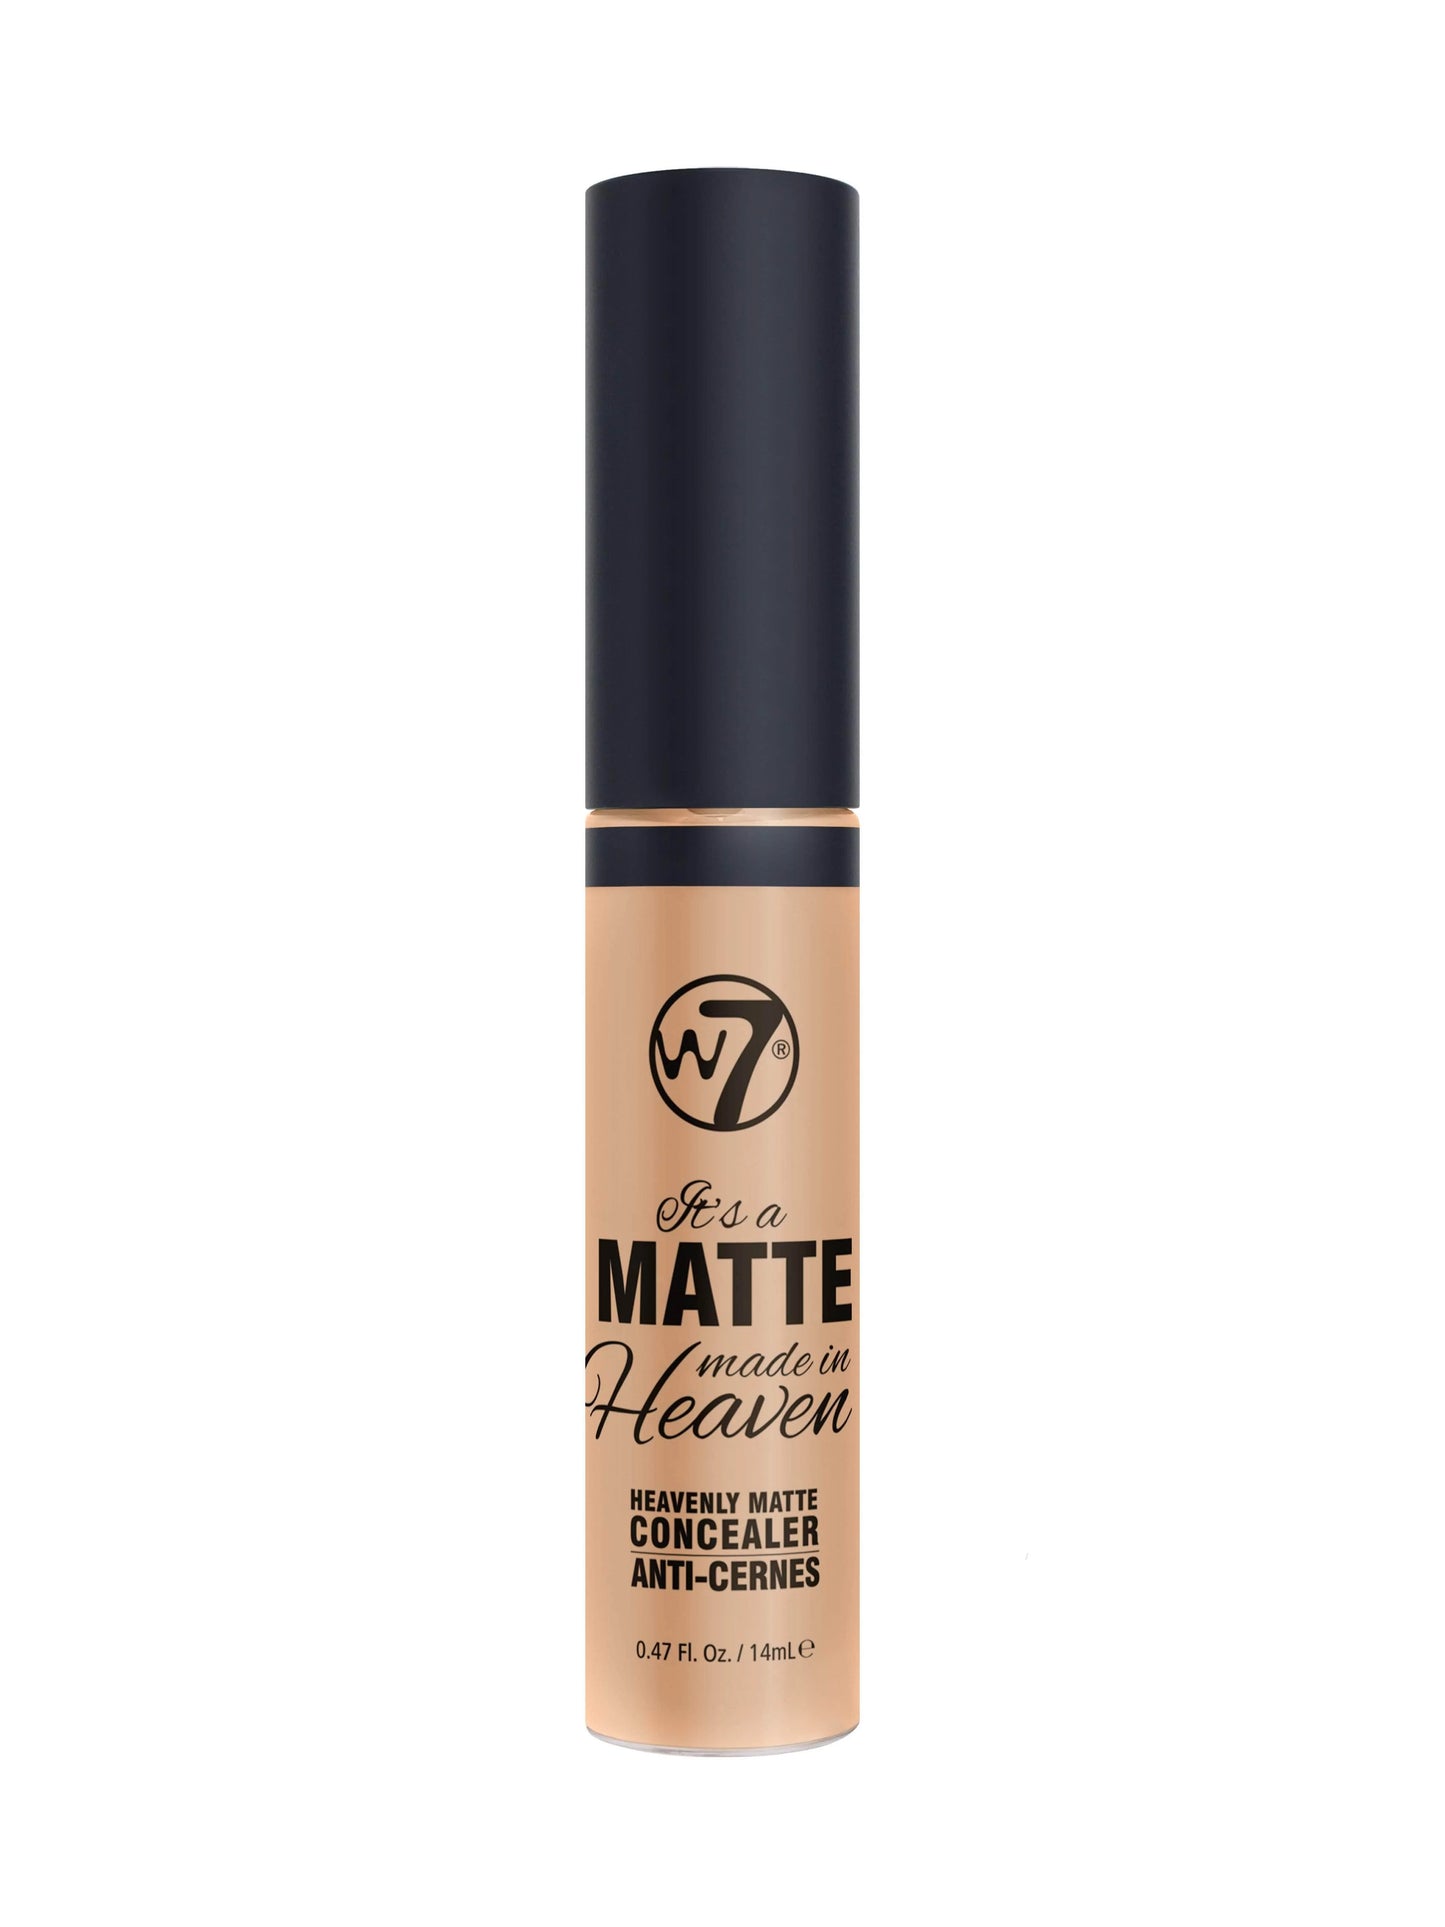 W7 Its A Matte Made In Heaven Concealer